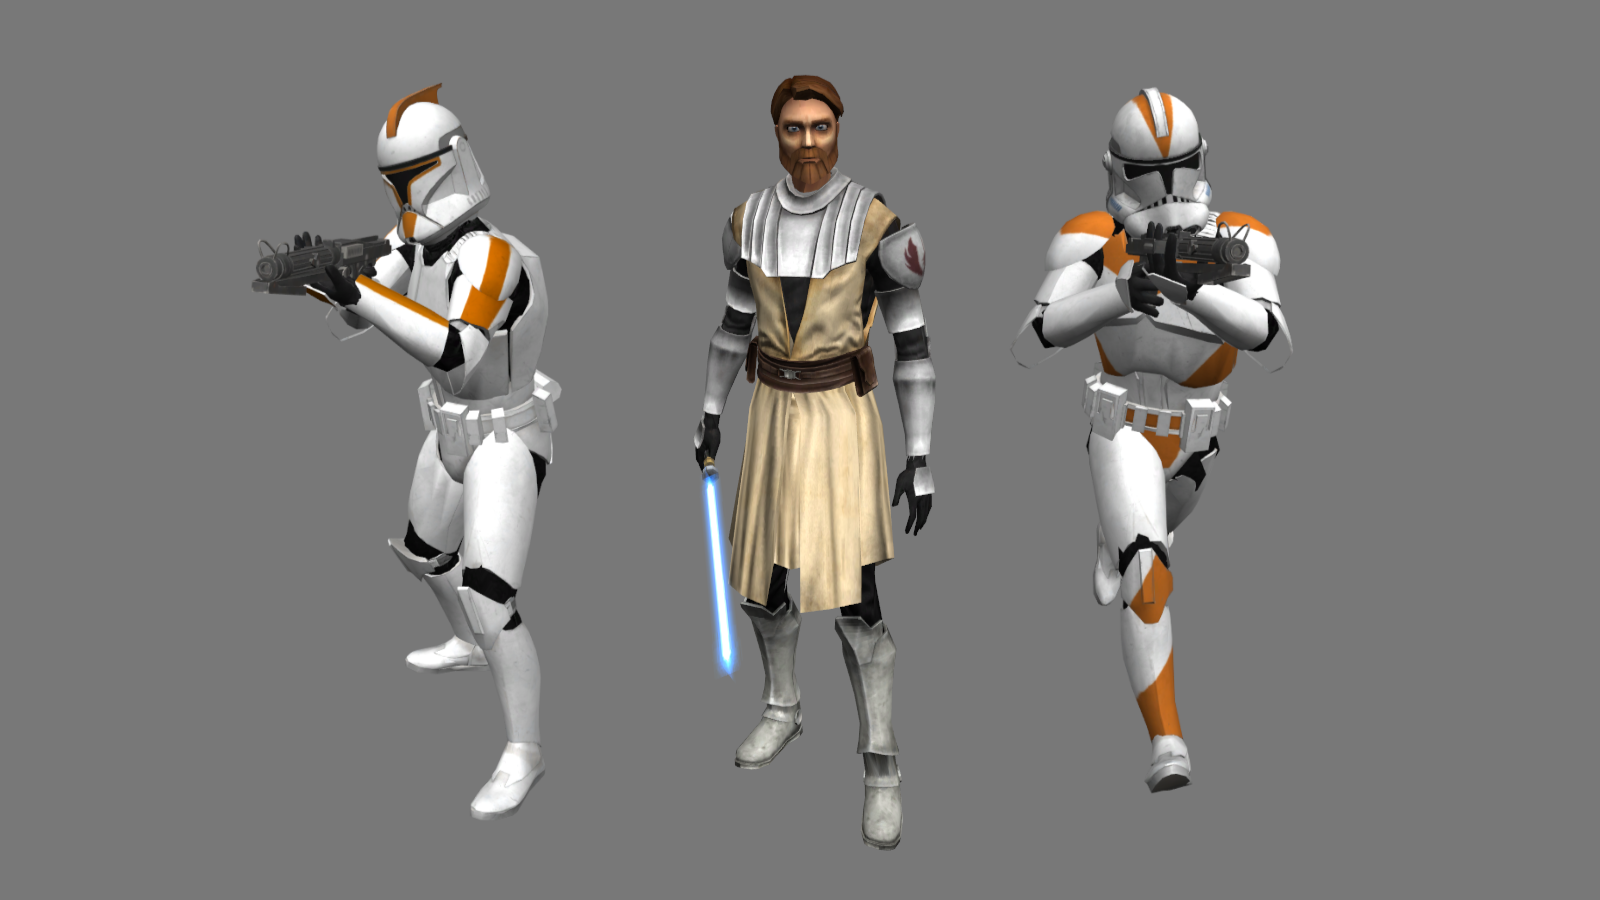 212th Attack Battalion image Assault: The Clone Wars mod for Star Wars: Empire at War: Forces of Corruption